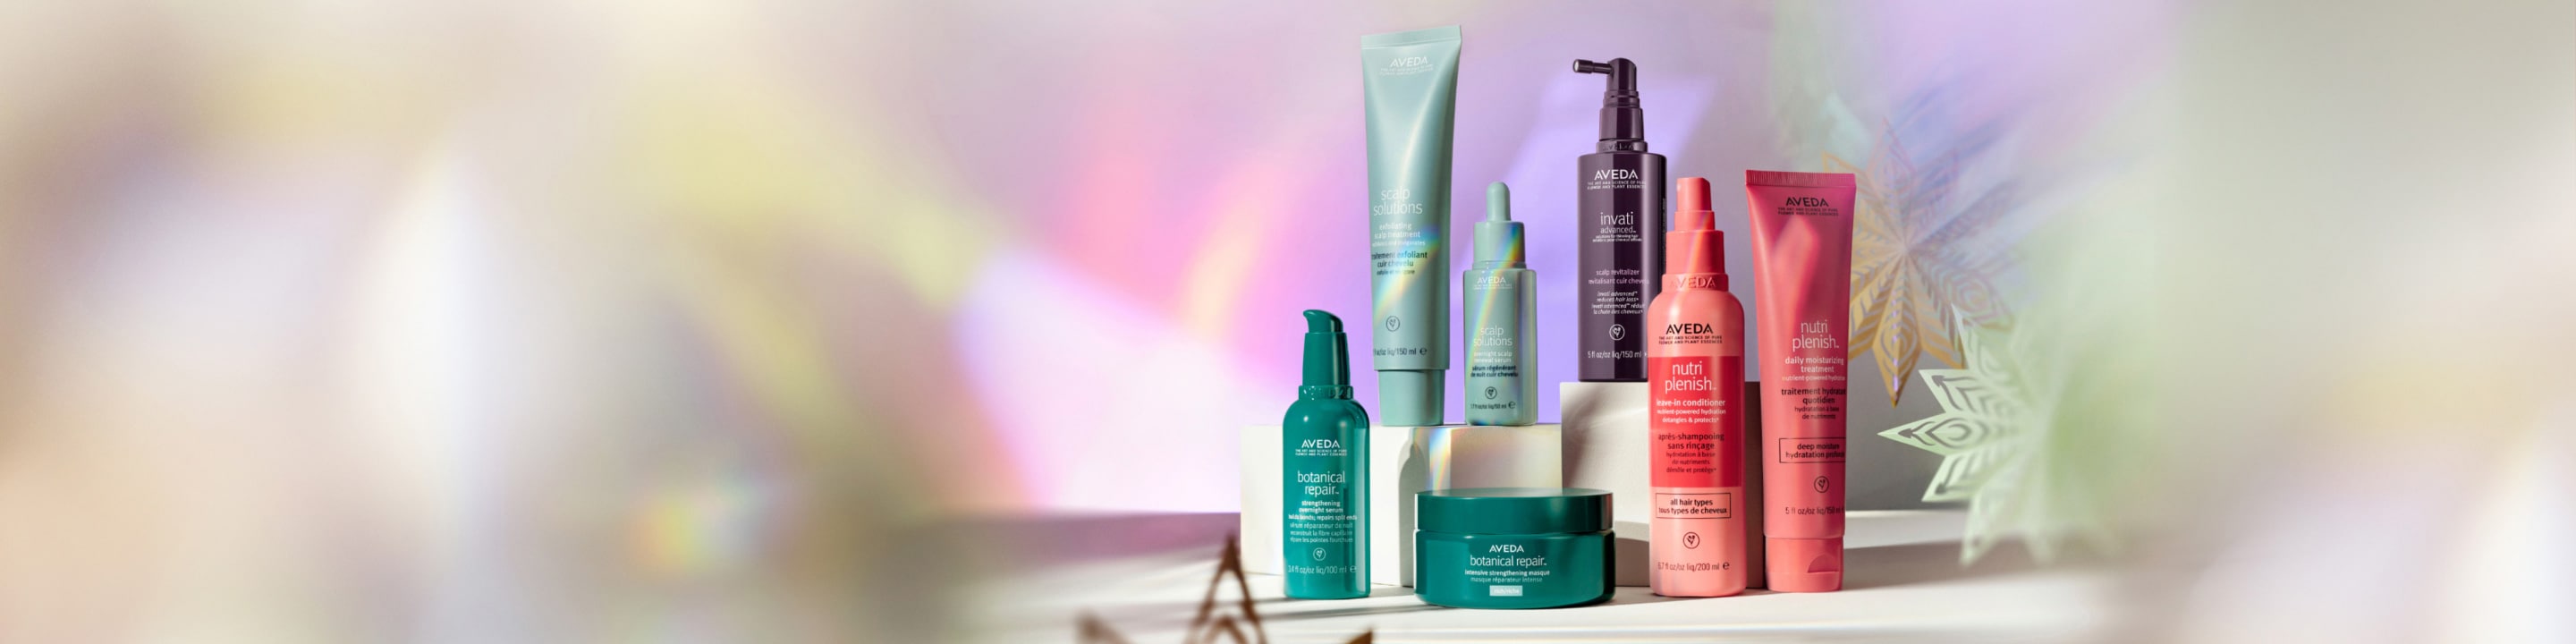 Hair care everyone loves. Discover high-performance presents.